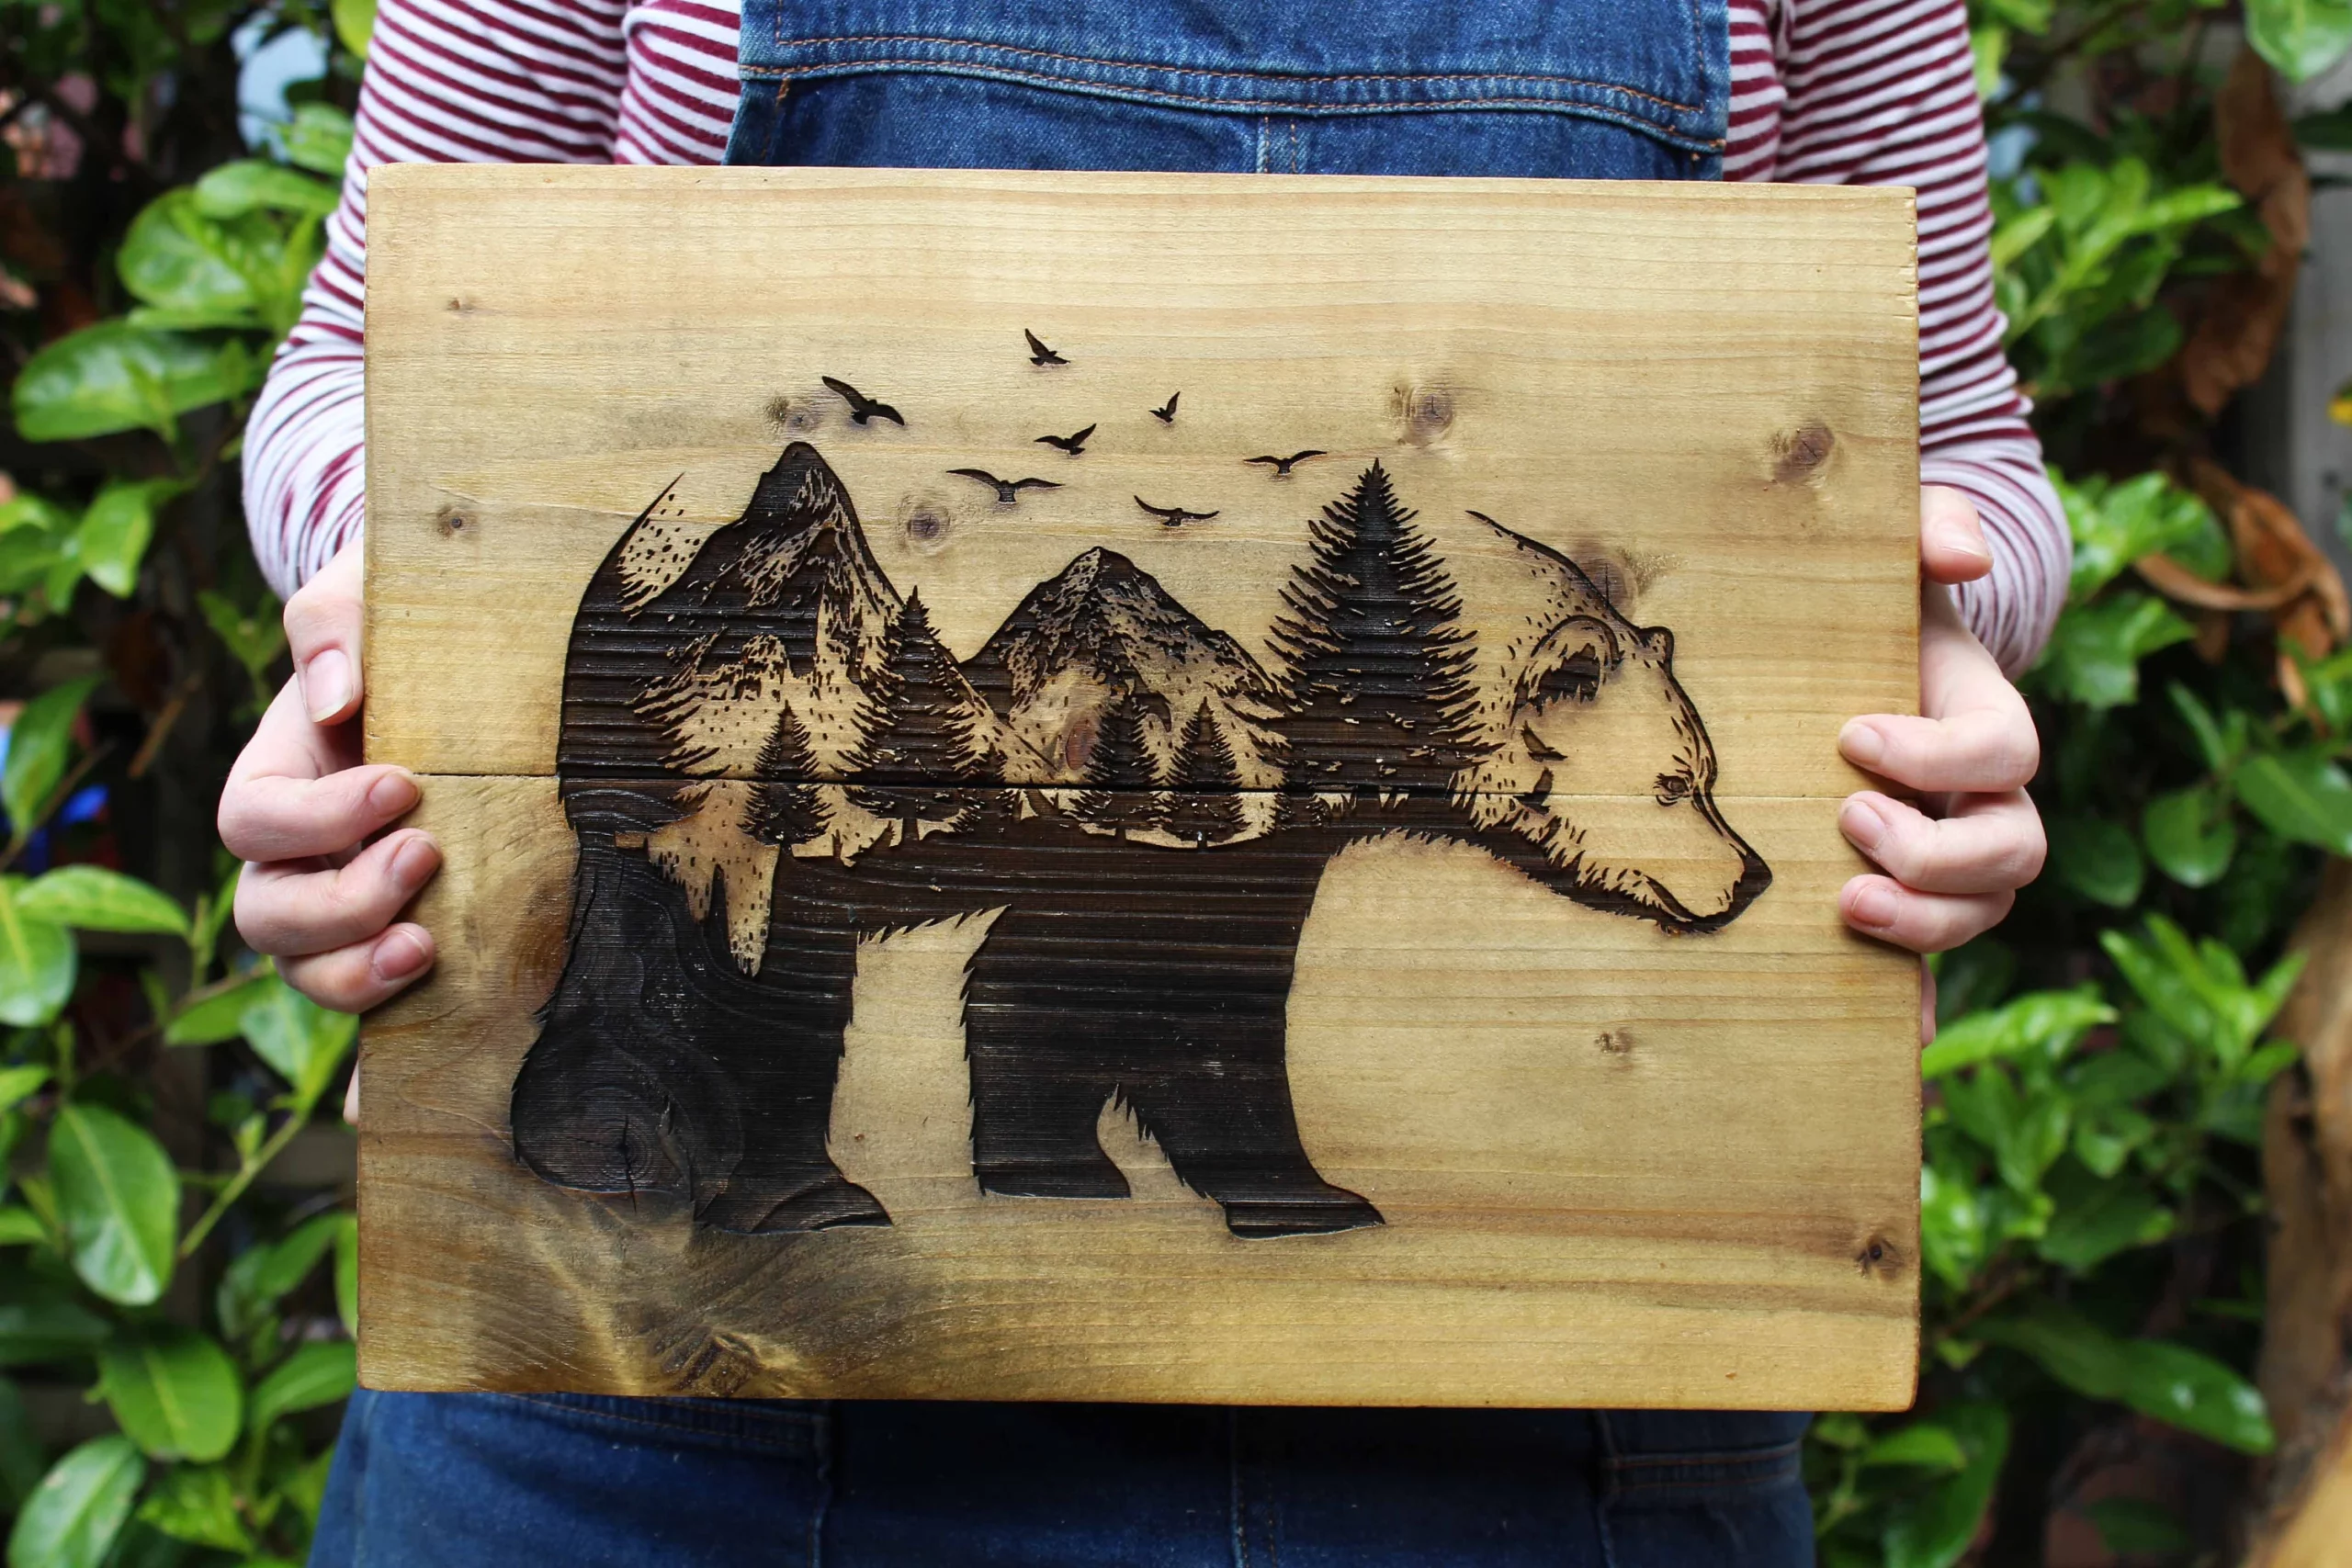 15 Wood burning techniques you need to know to level up your art